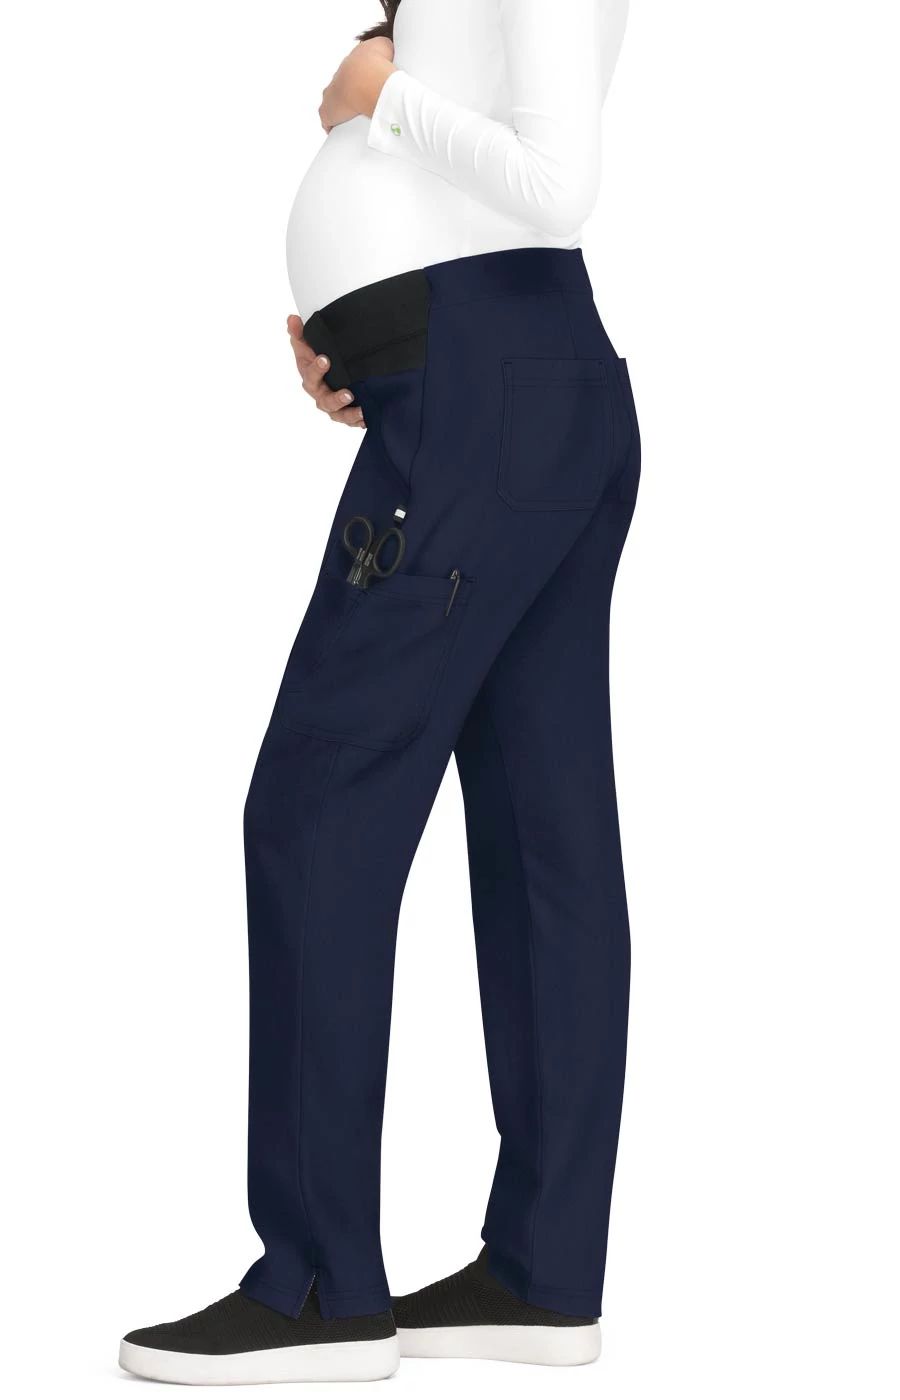 on-the-move-maternity-pant-navy